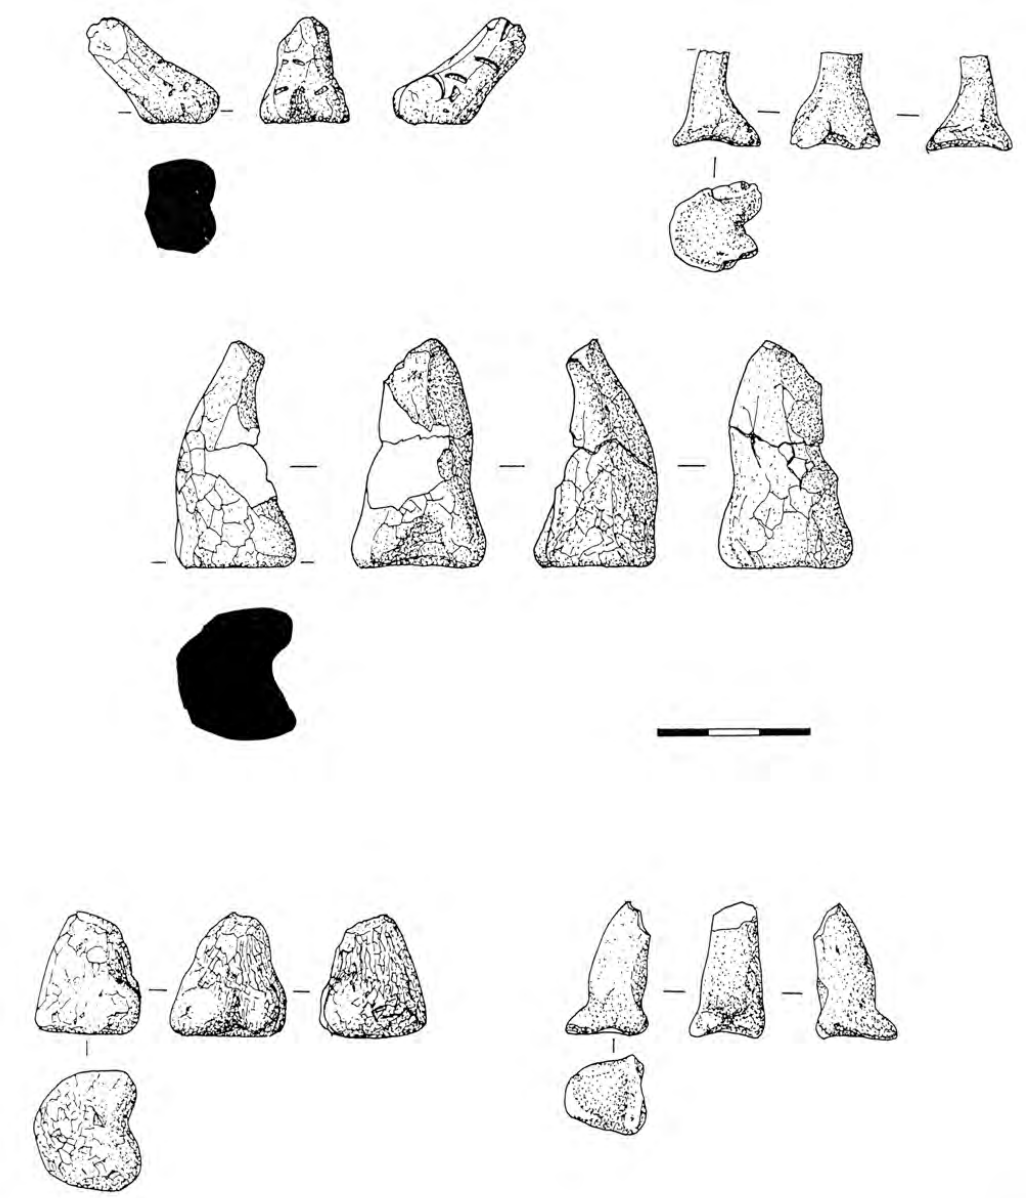 Several drawings of conical figurines from different angles.